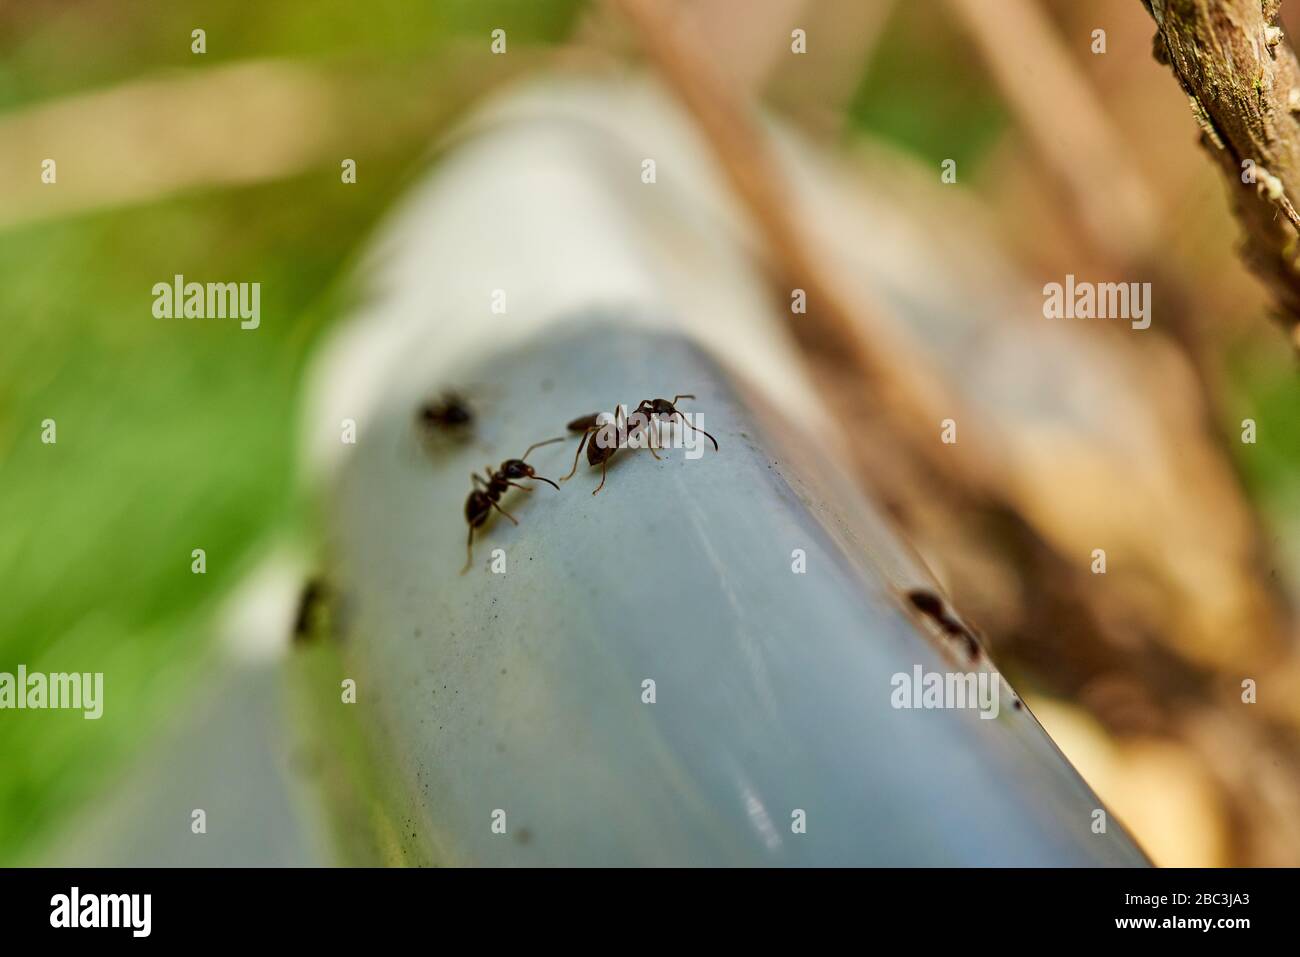 Common black ants crawling over a garden planting pot. Stock Photo